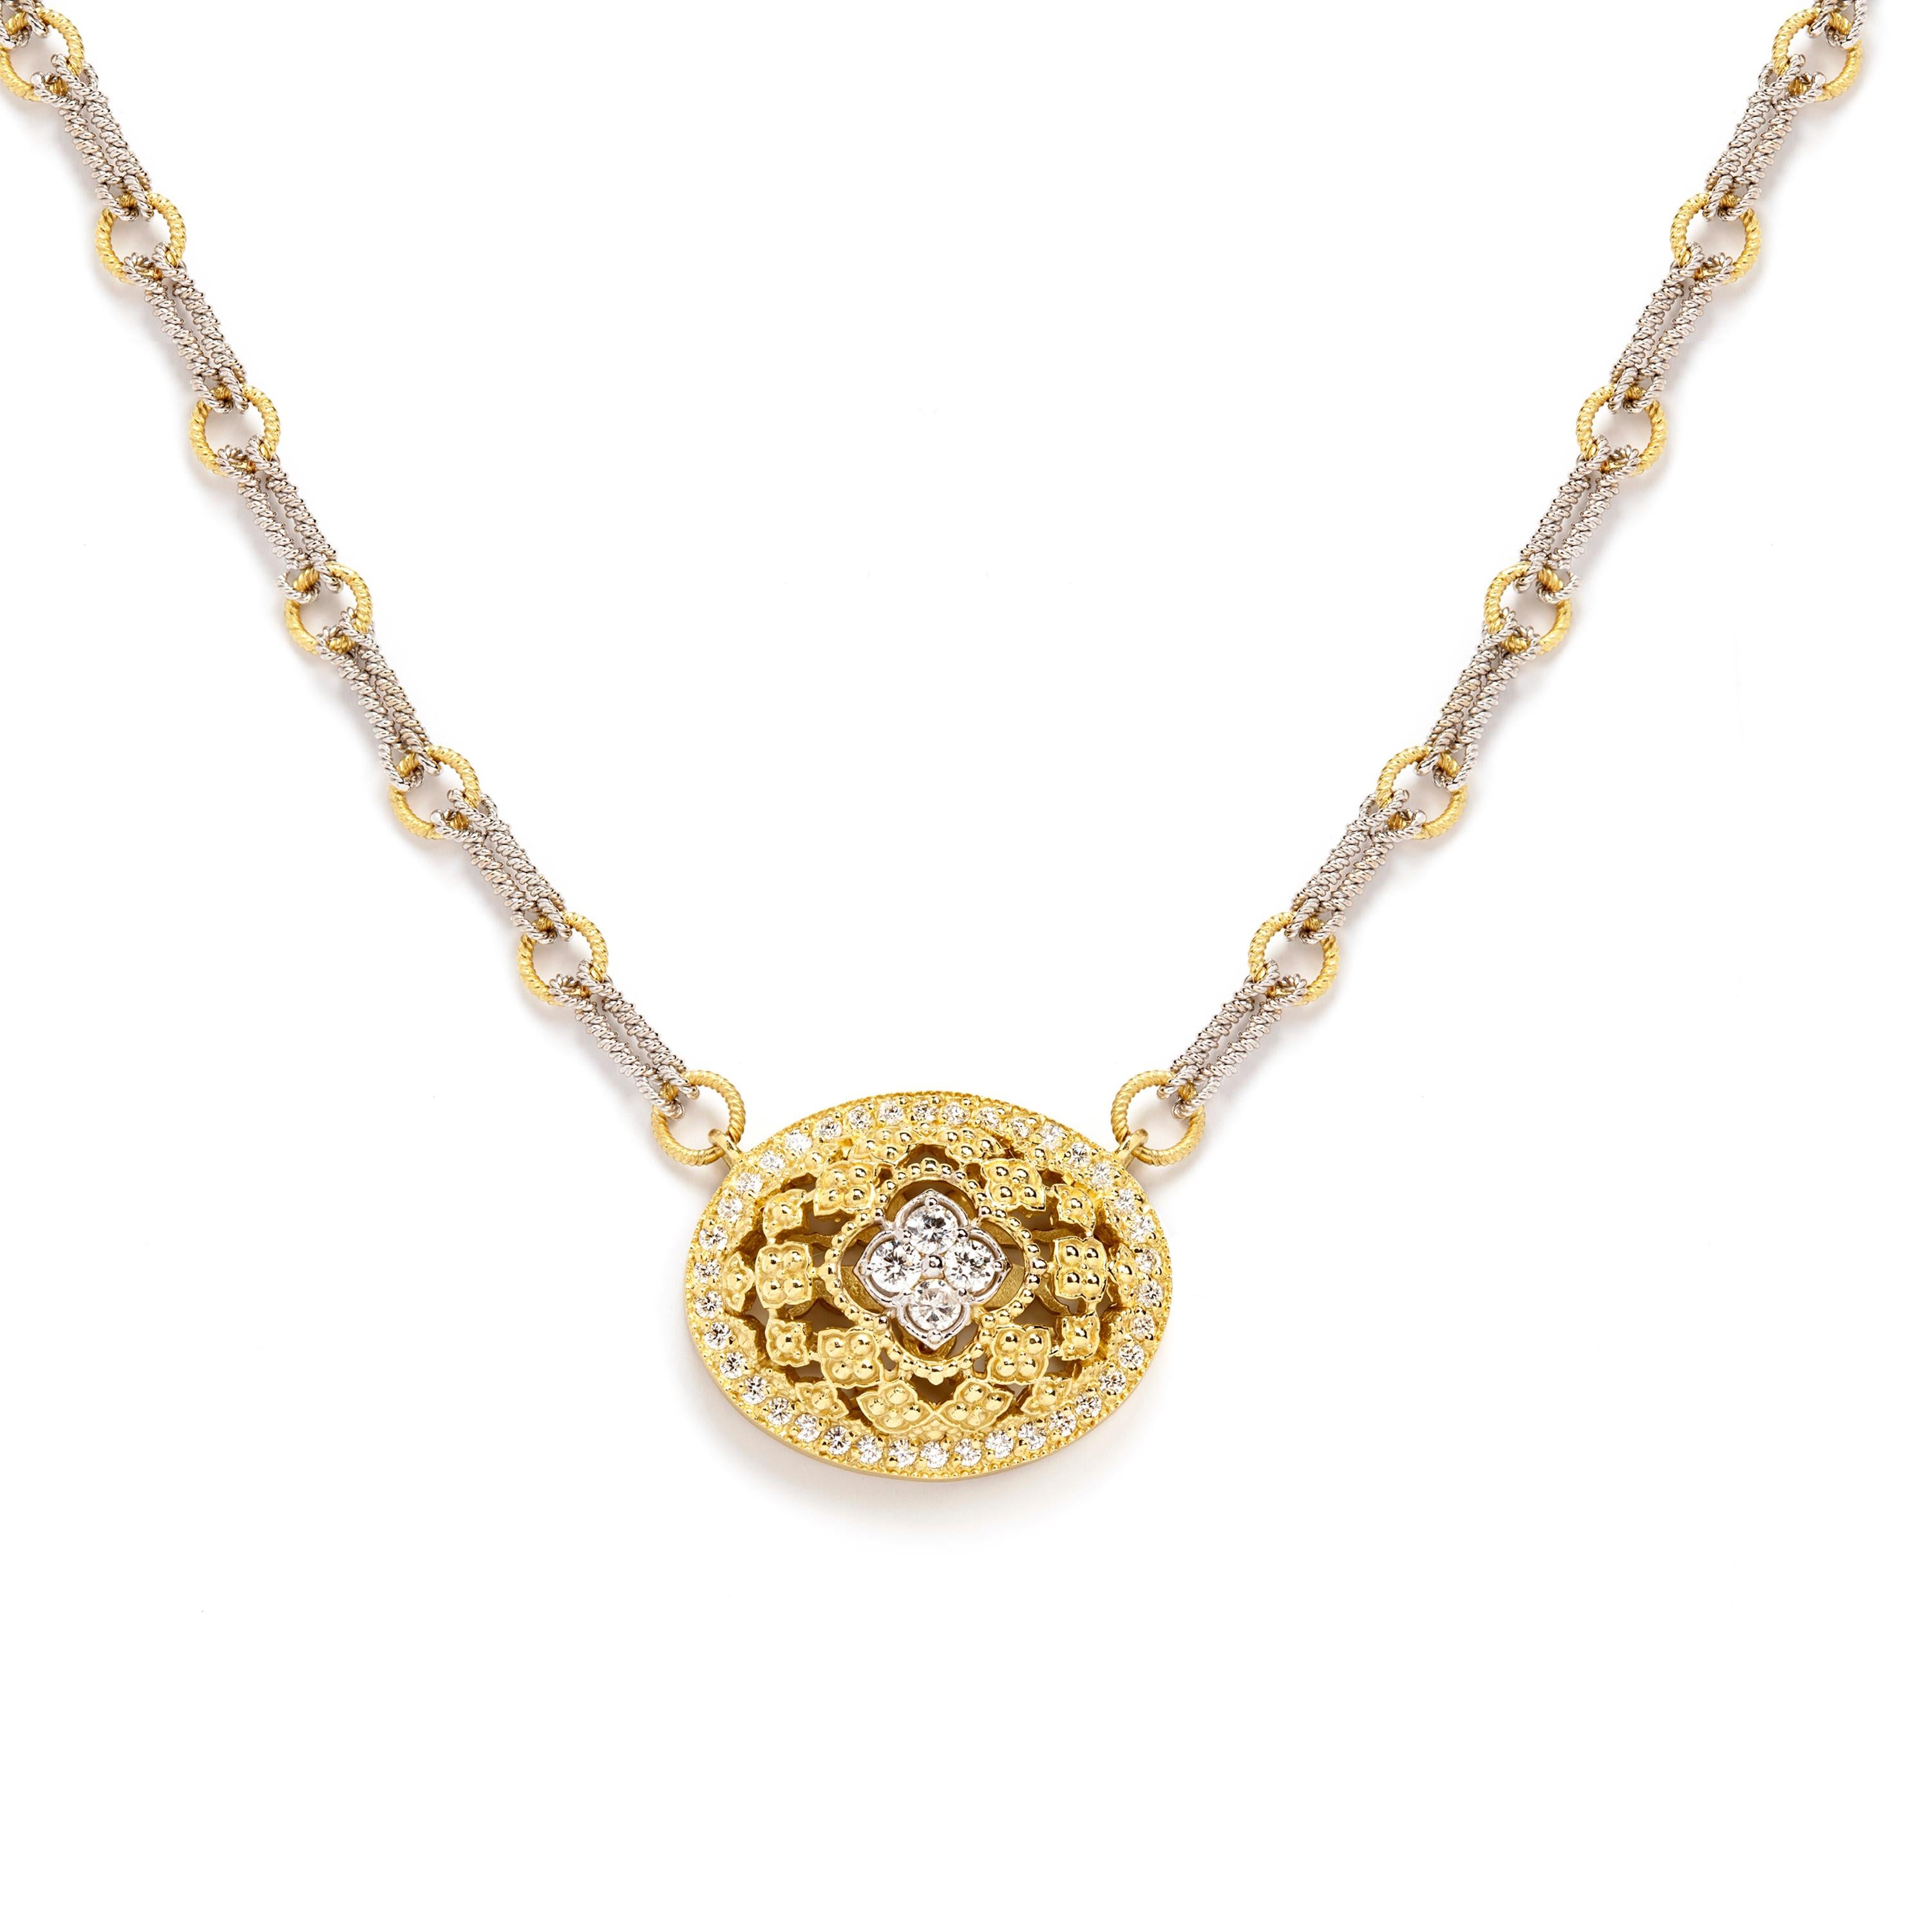 Women's Stambolian Two-Tone White Yellow Gold and Diamond Oval Pendant Chain Necklace